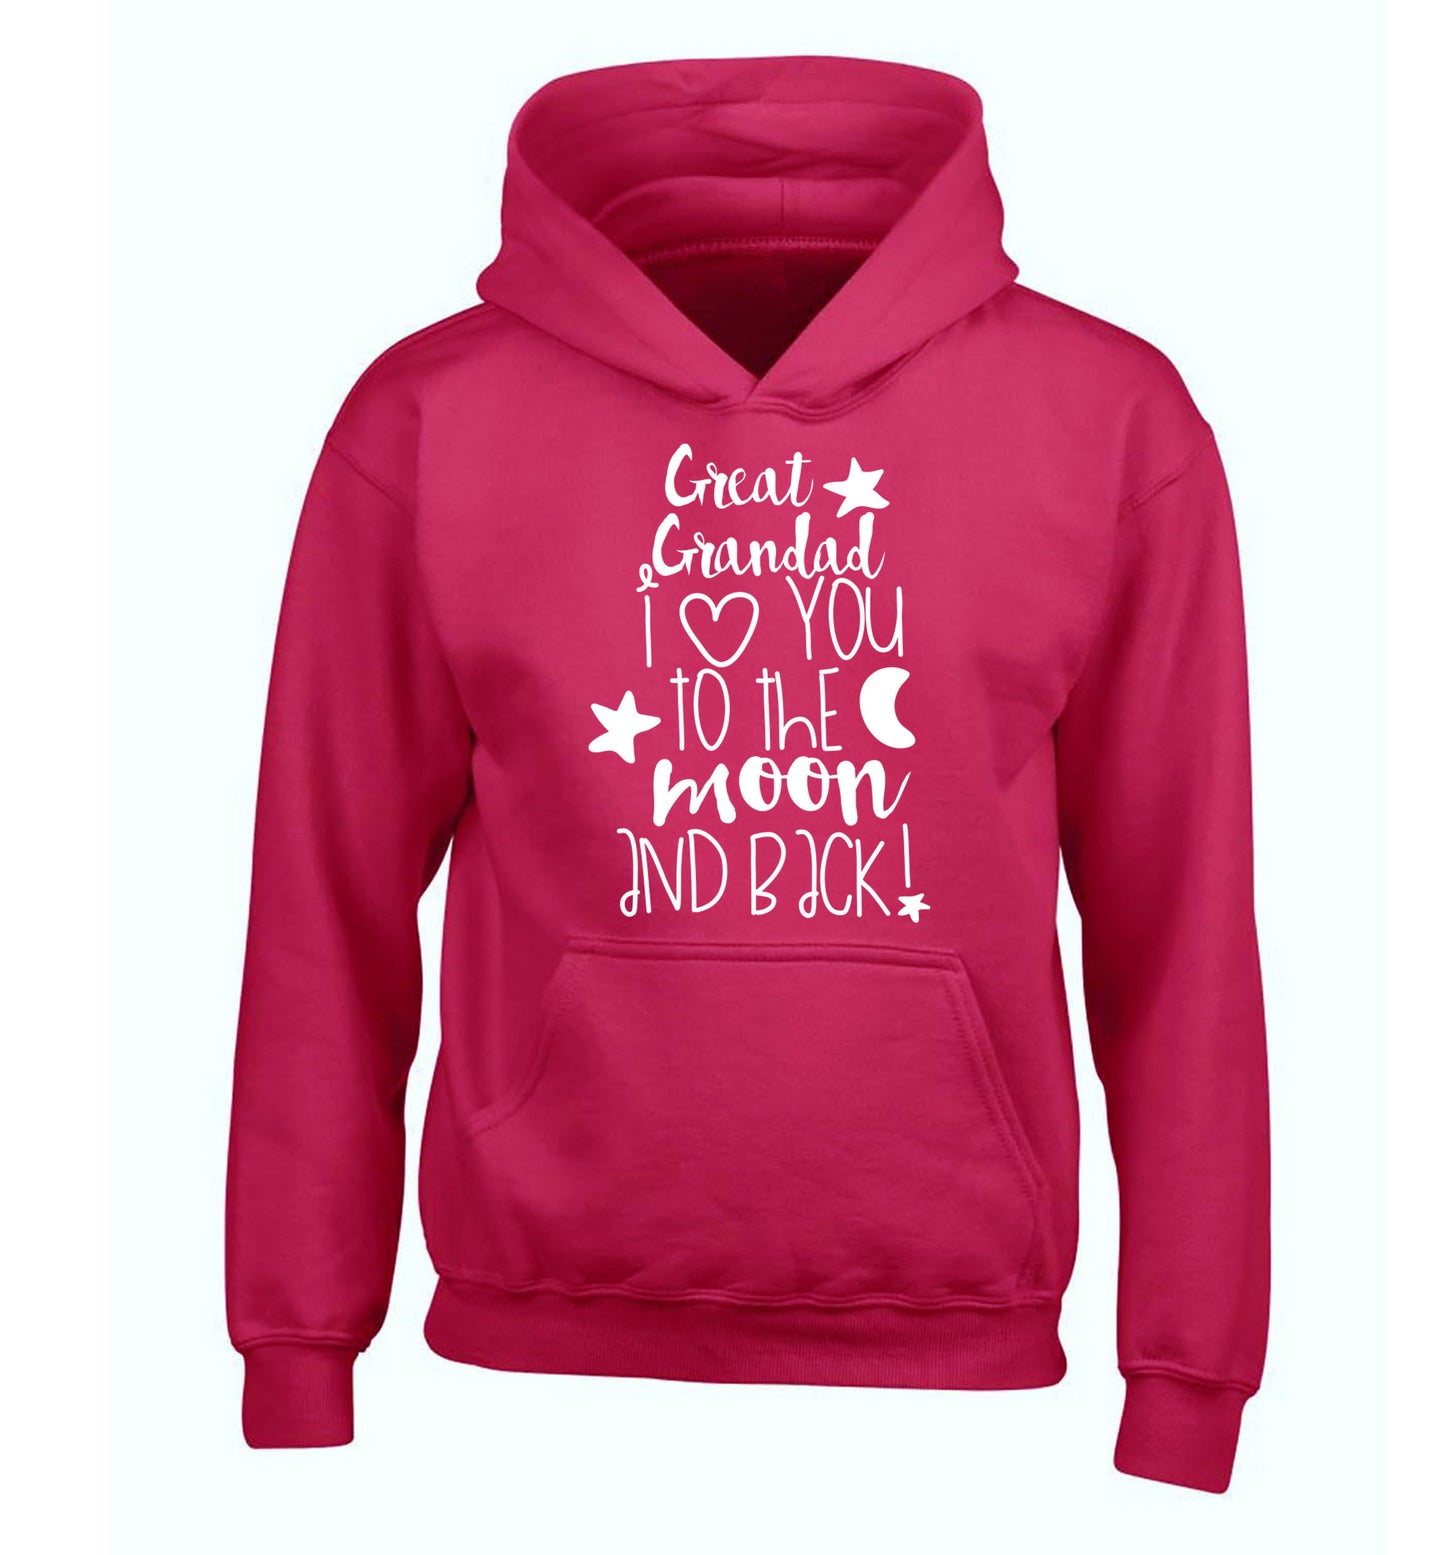 Great Grandad I love you to the moon and back children's pink hoodie 12-14 Years